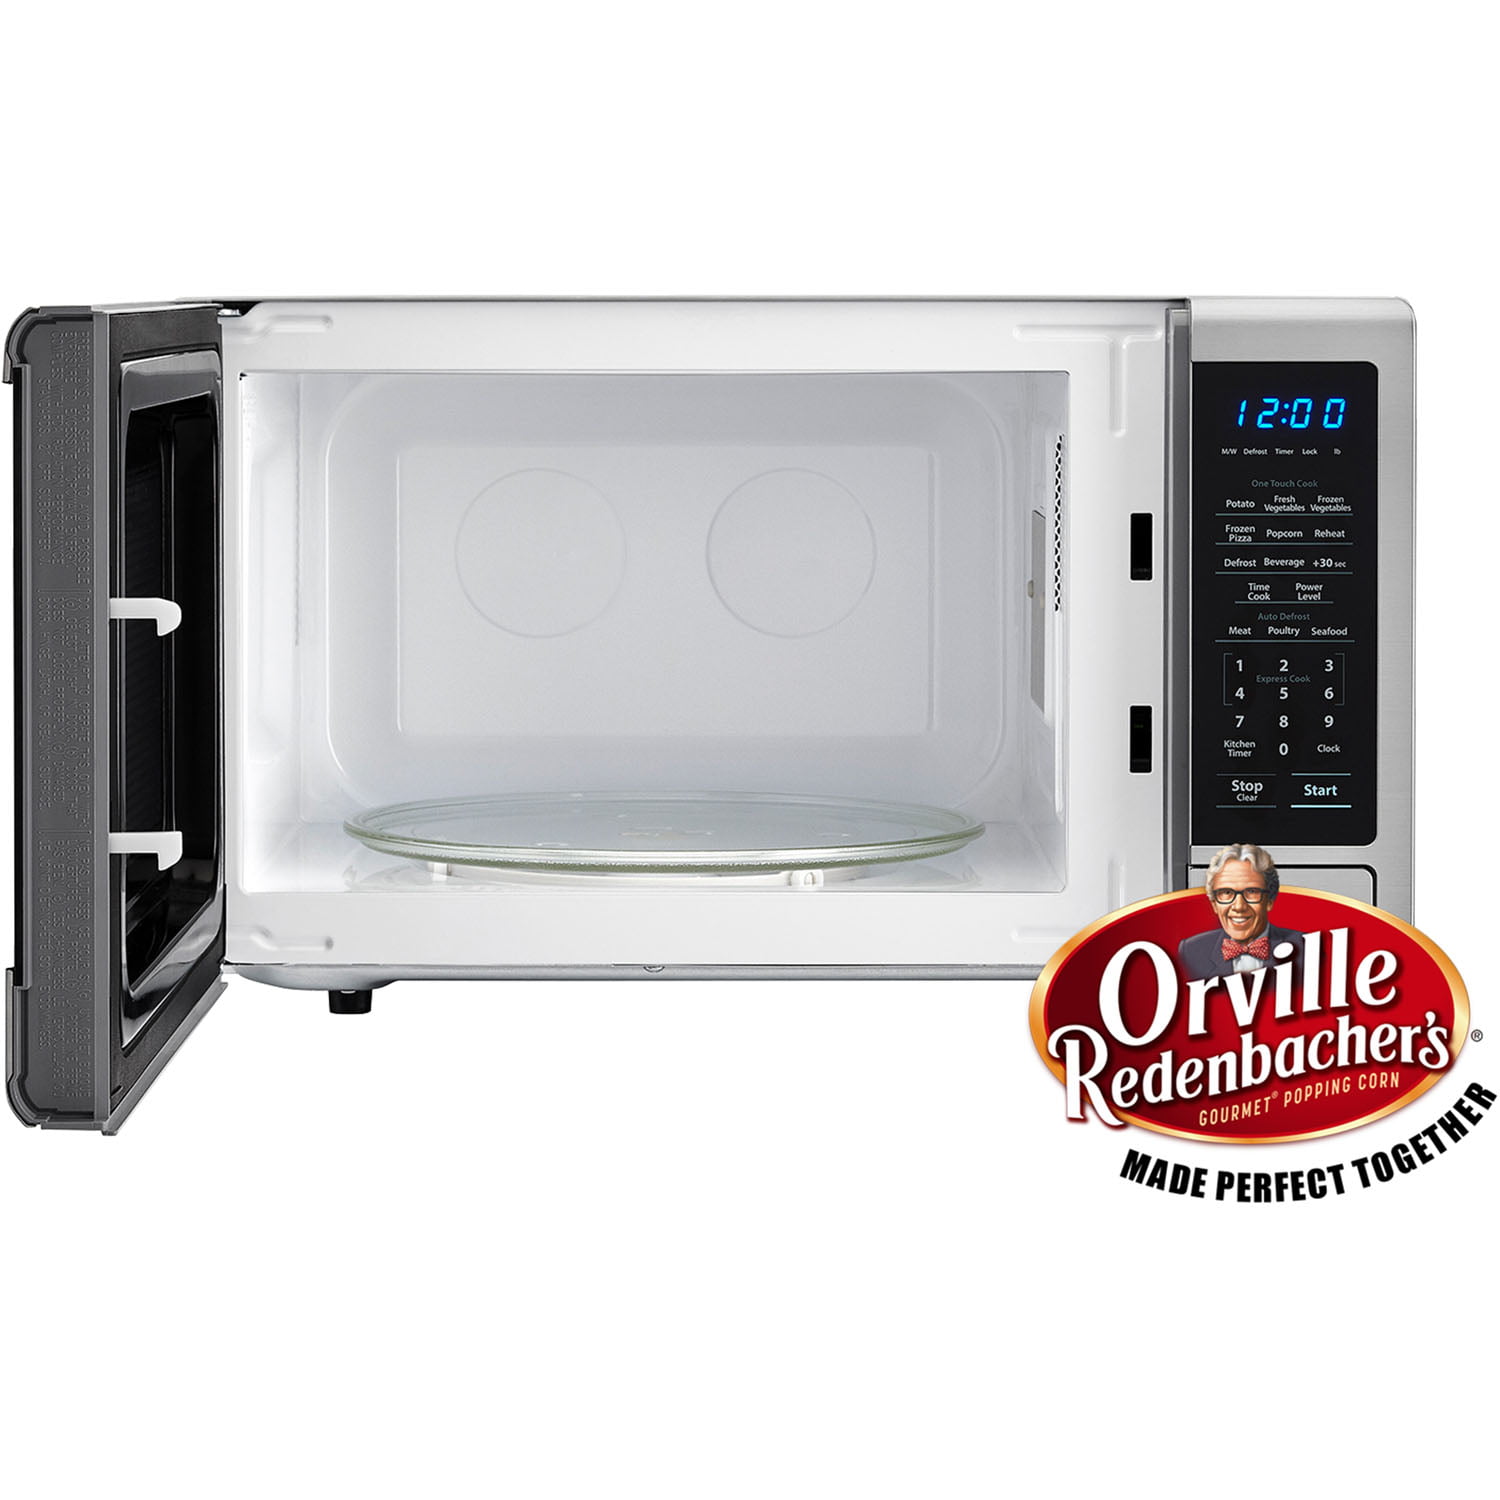 1000W Countertop Microwave Oven with Orville Redenbachers Popcorn Preset Ft Carousel 1.4 Cu